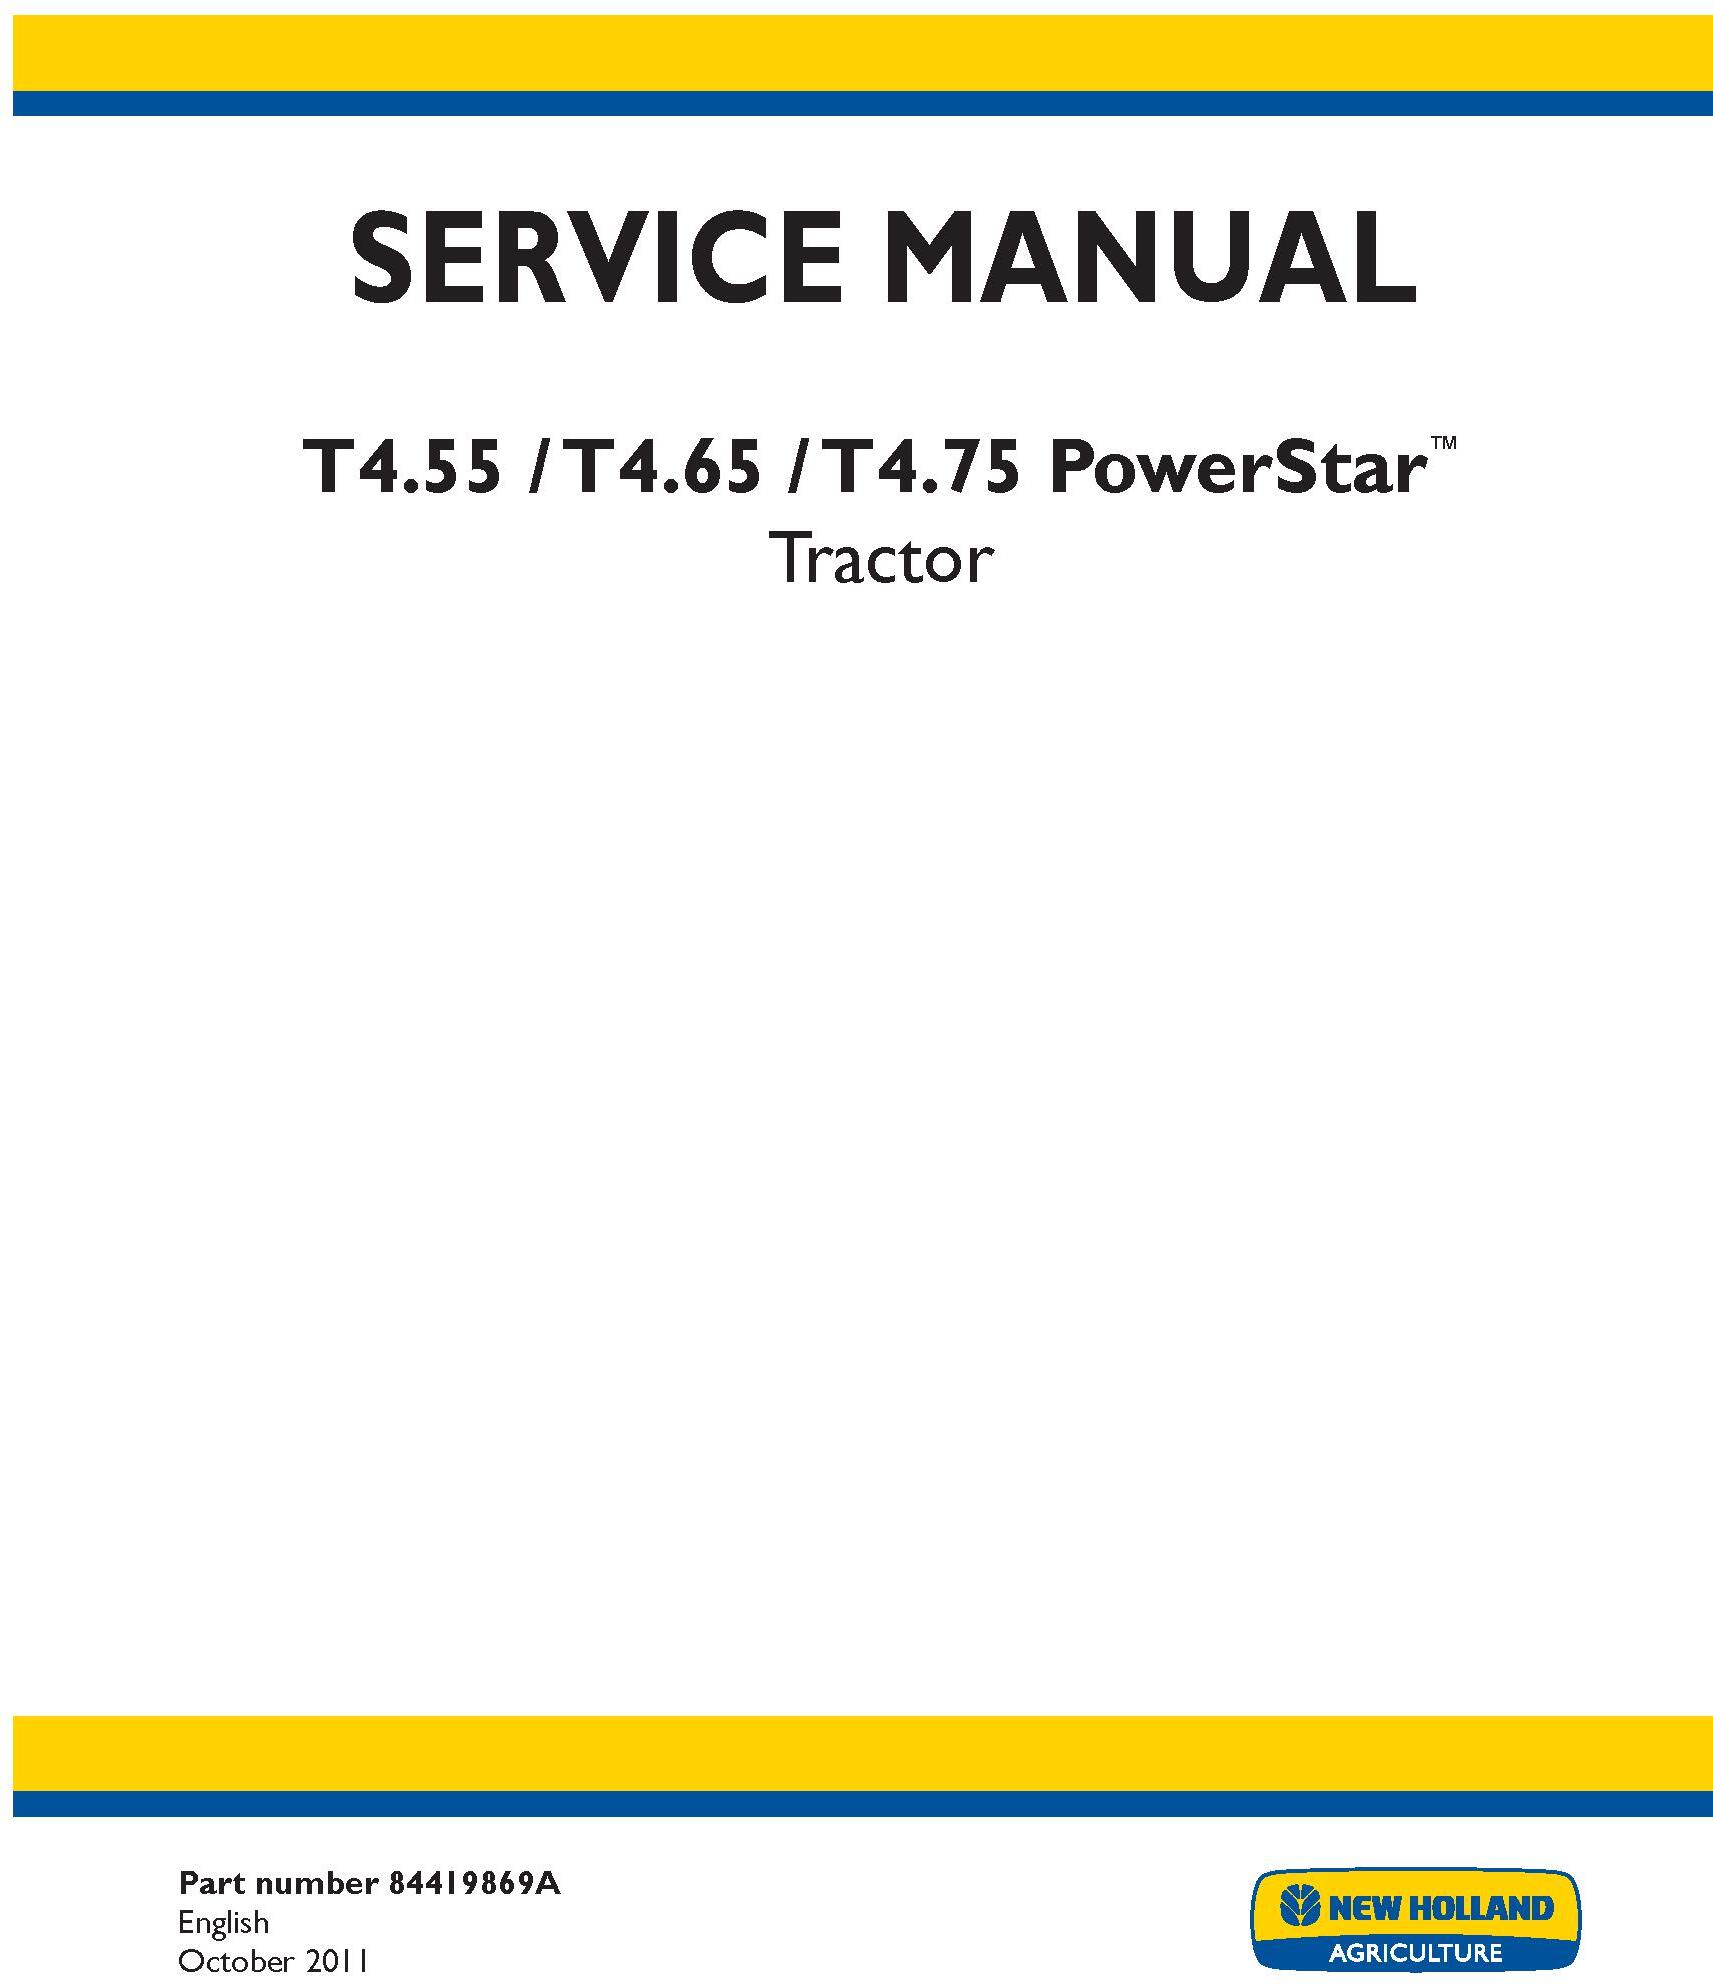 New Holland T4.55, T4.65, T4.75 PowerStar Tractor Service Manual - 19574